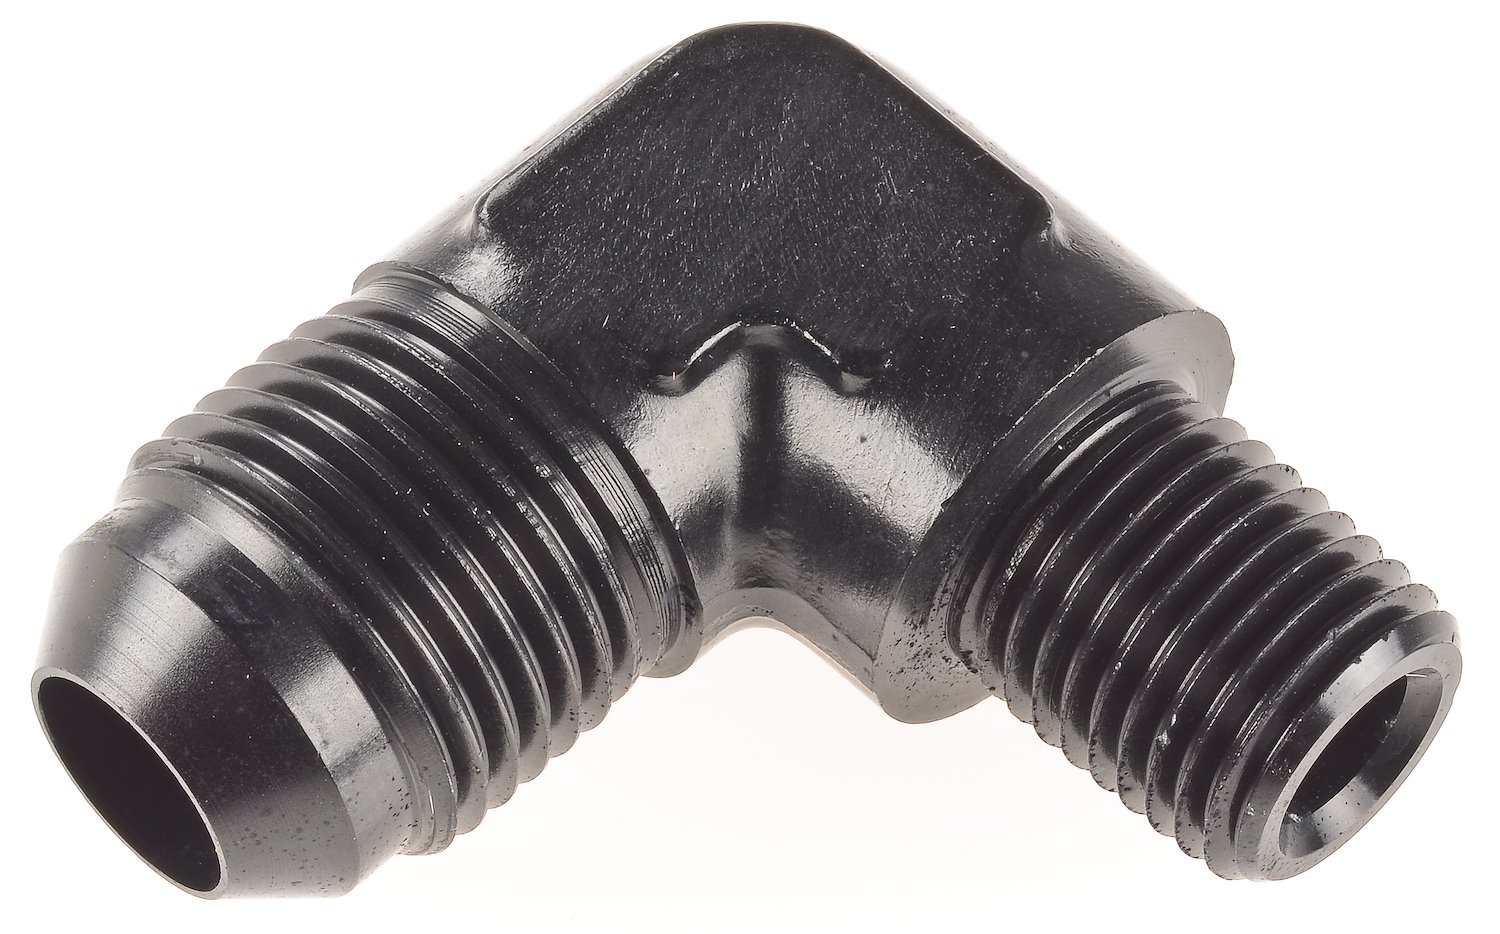 AN to NPT 90-Degree Adapter Fitting [-8 AN Male to 1/4 in. NPT Male, Black]